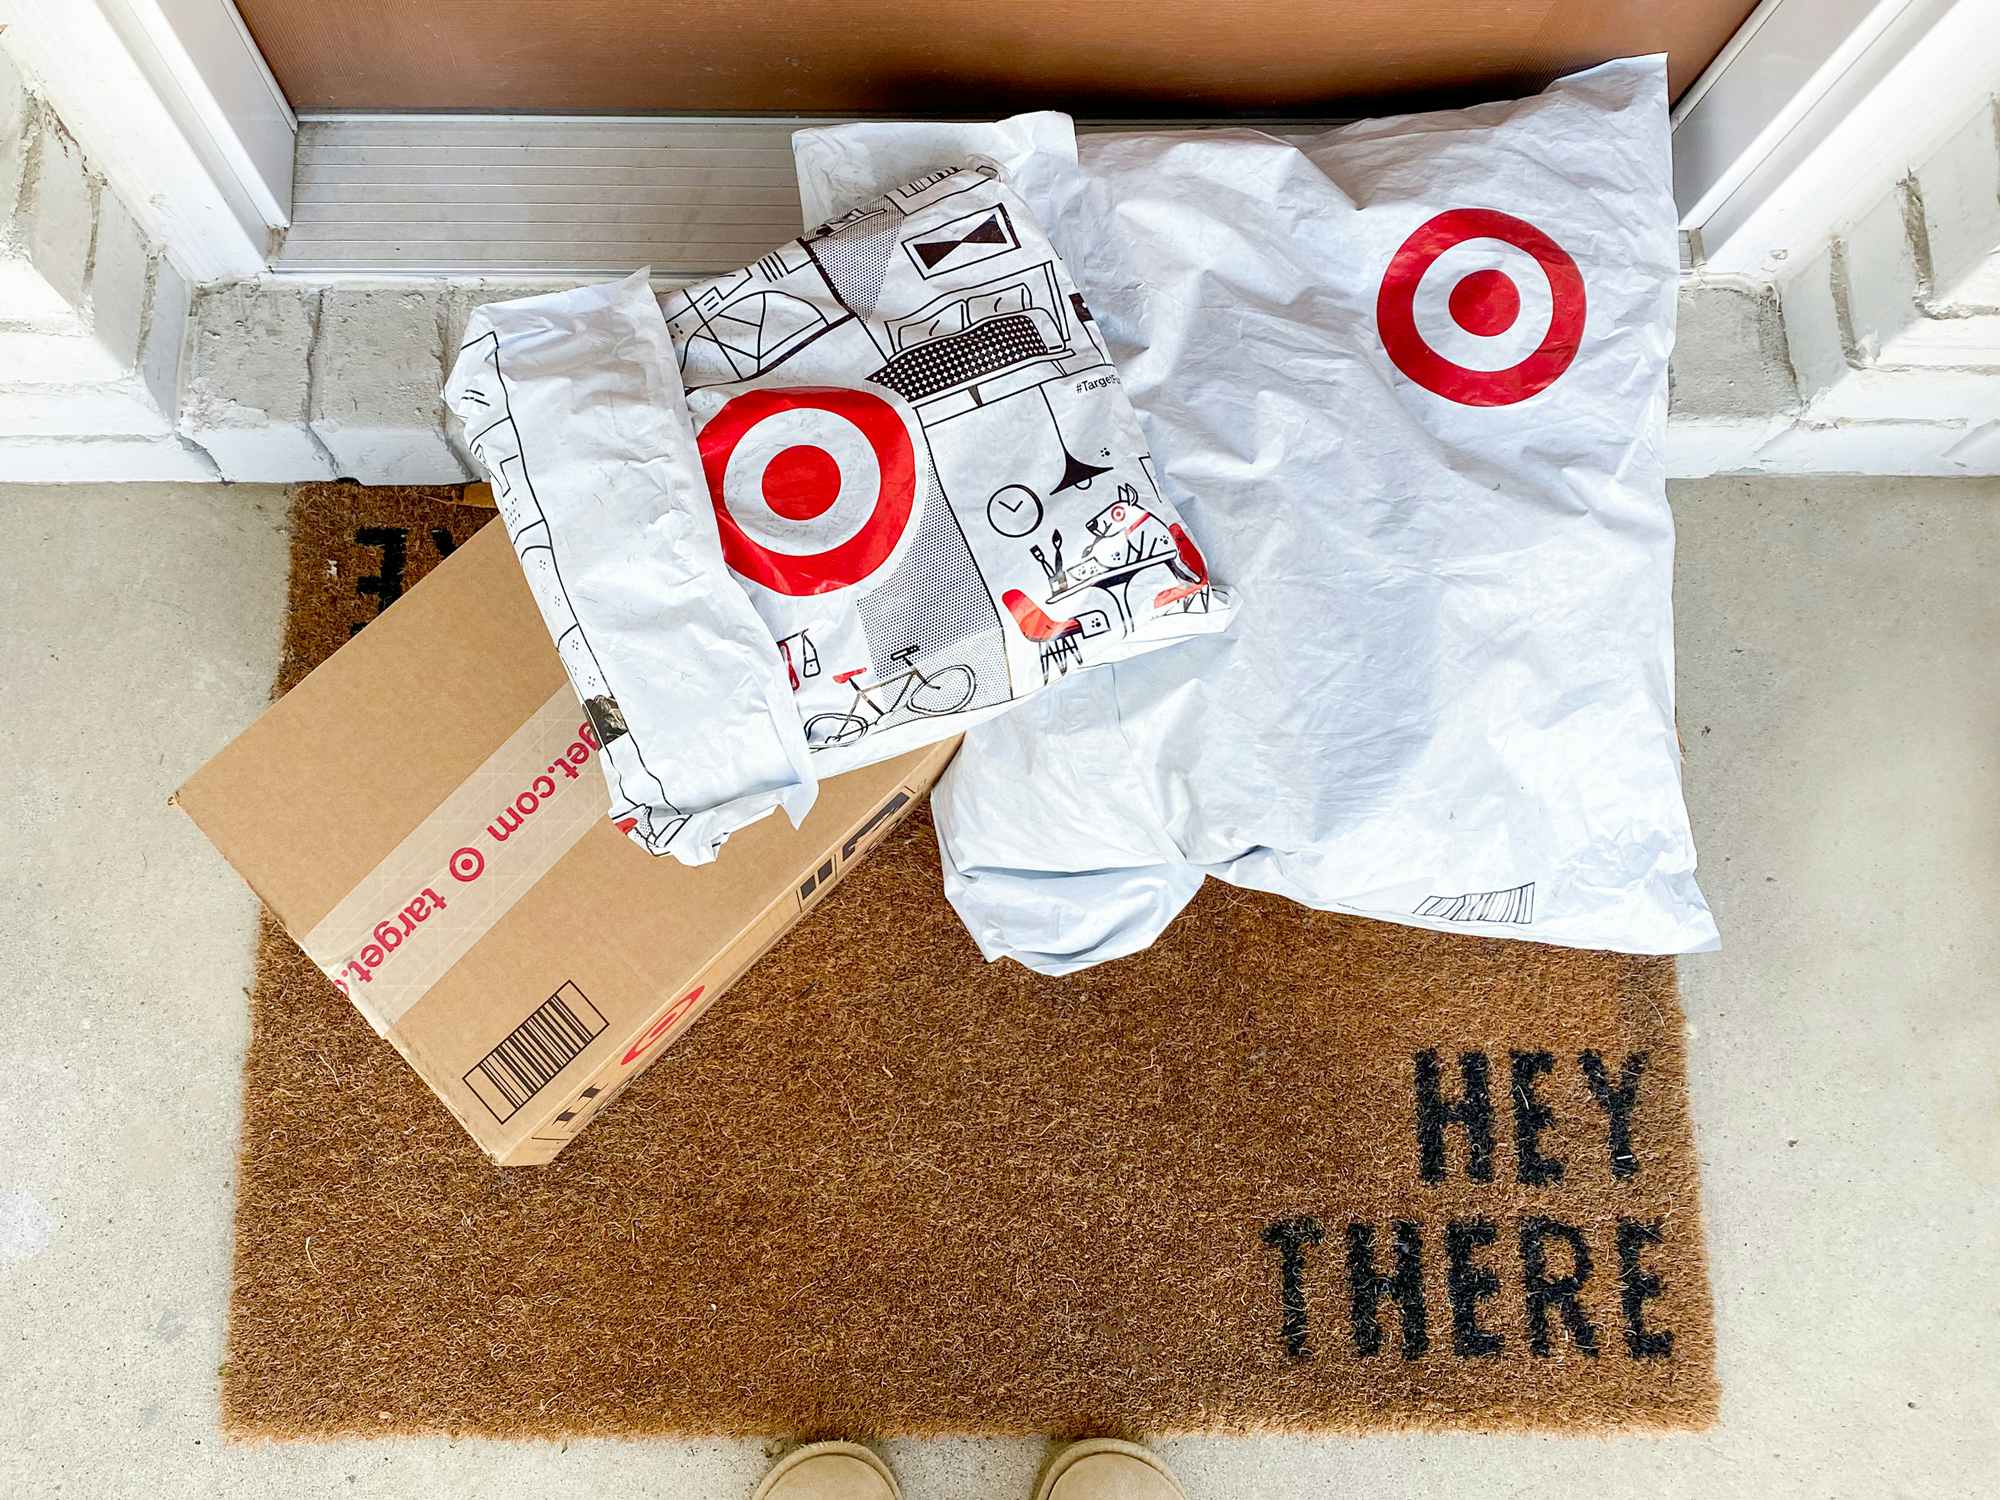 target-redcard-free-shipping-boxes-packages